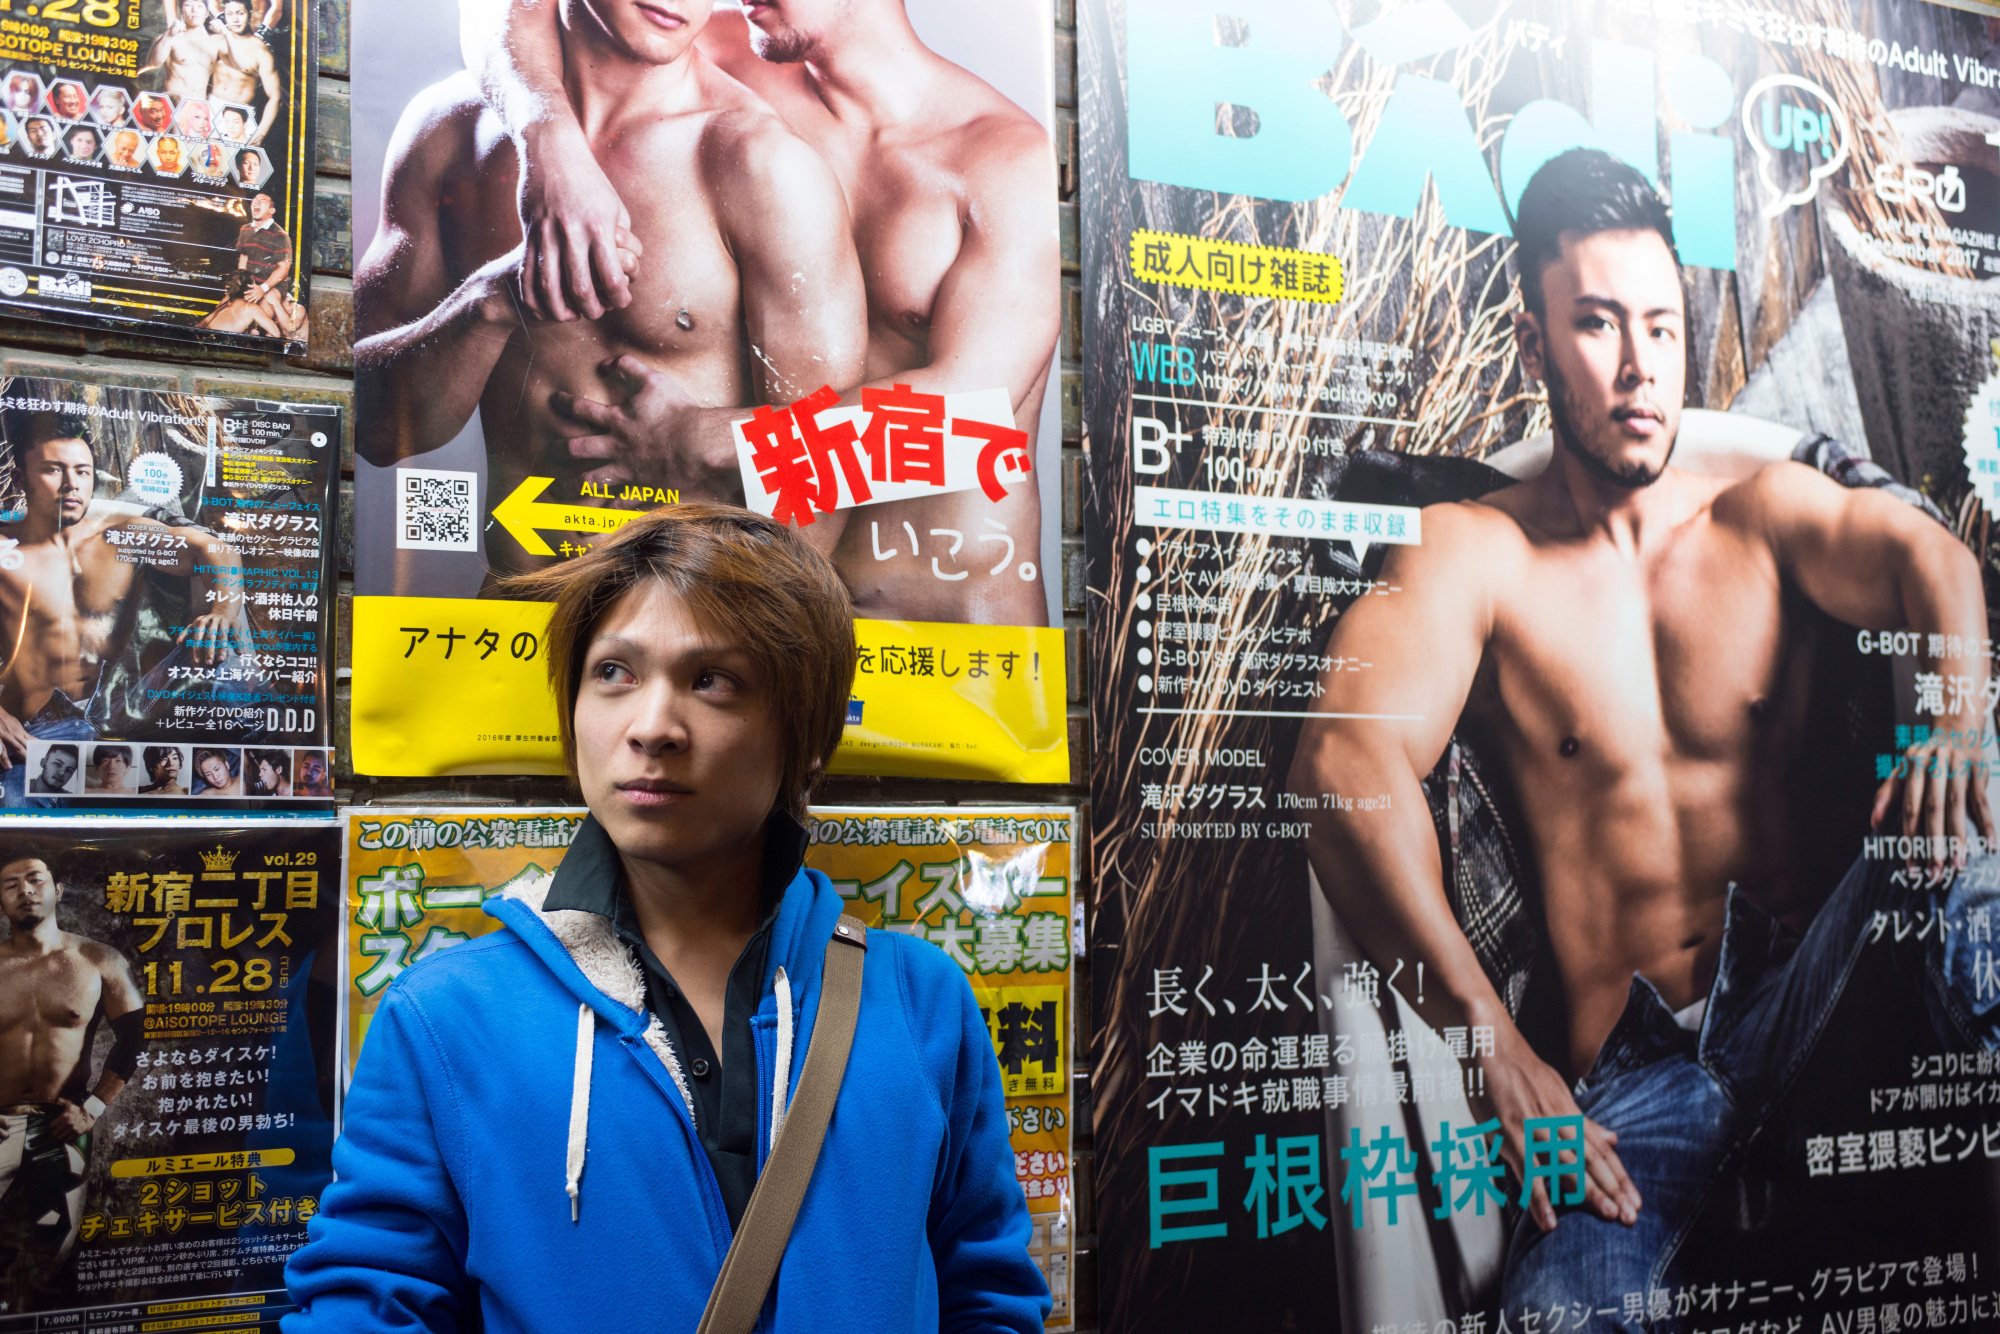 Boys for rent in Tokyo Sex, lies and vulnerable young lives photo image